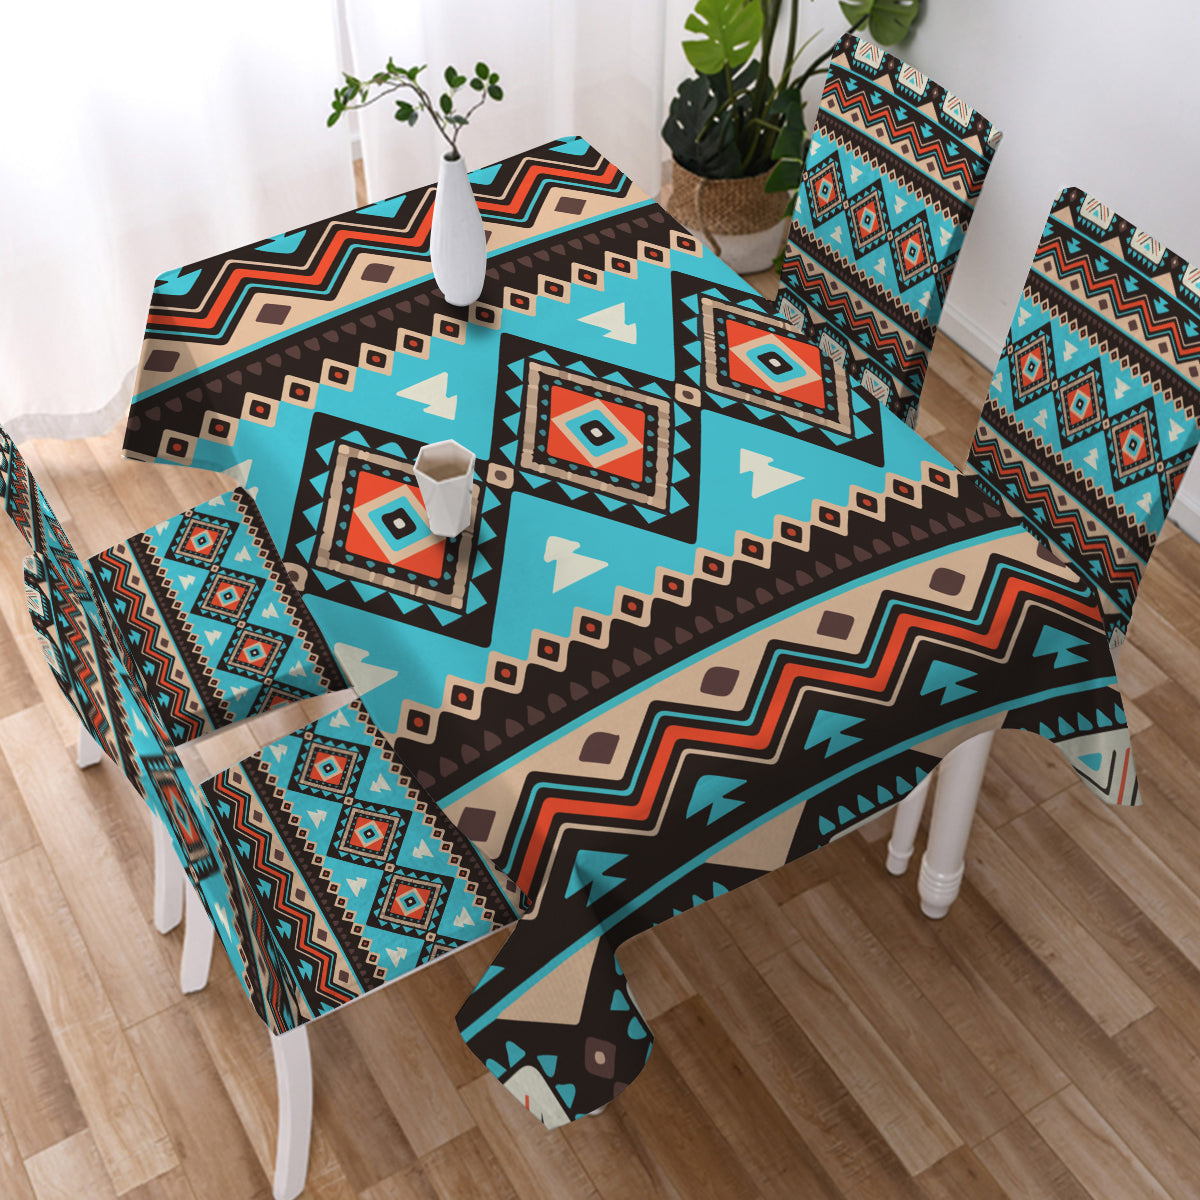 Powwow Store gb nat00319 tribal line shapes ethnic pattern tablecloth